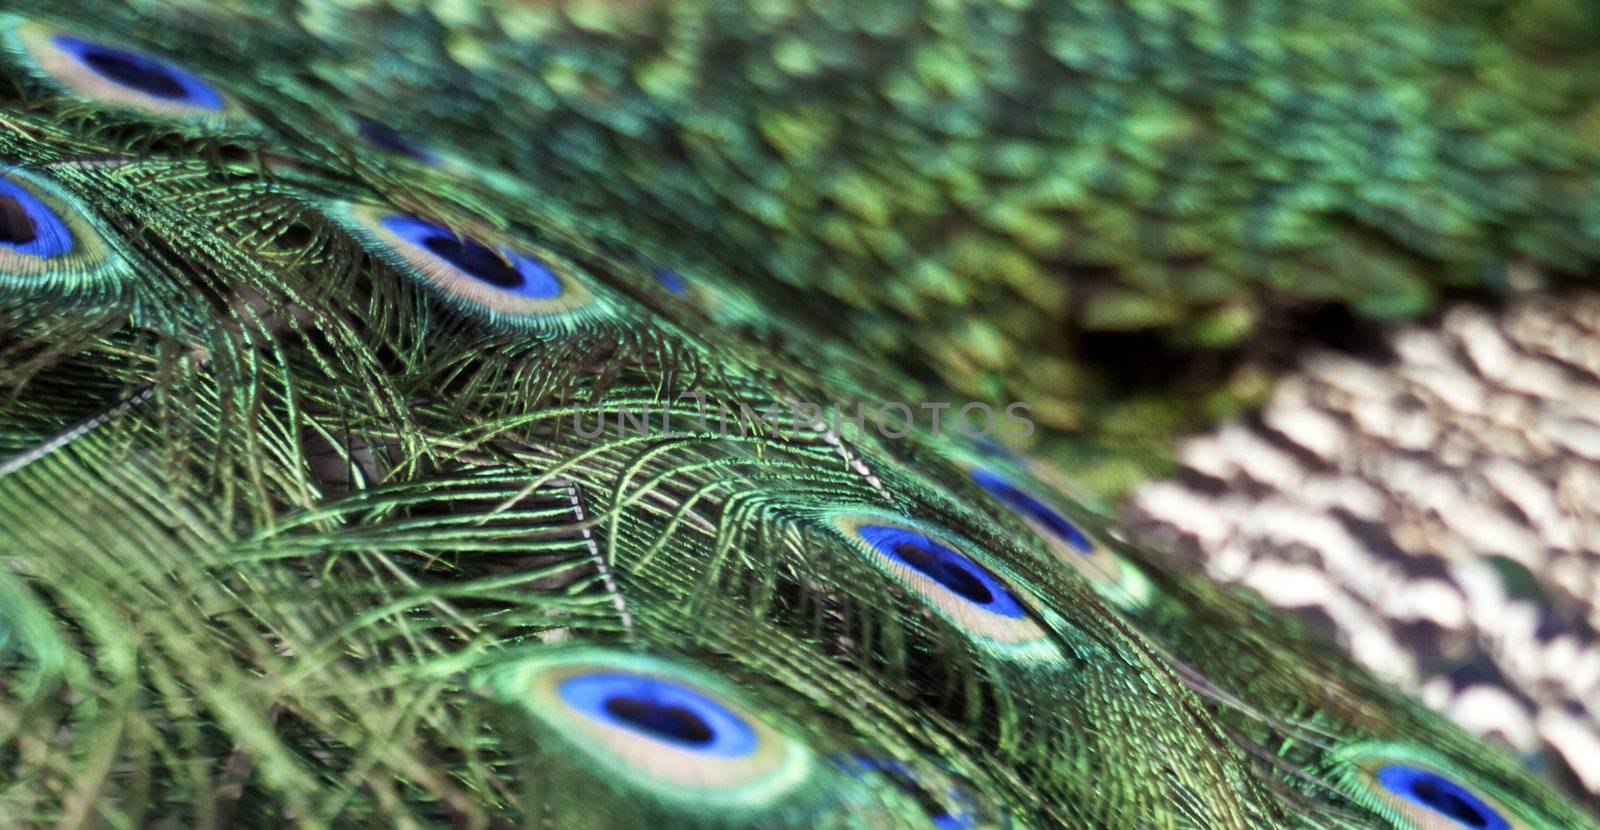 Abstract image showing detail and magnificent colours on the feathers of a peacock